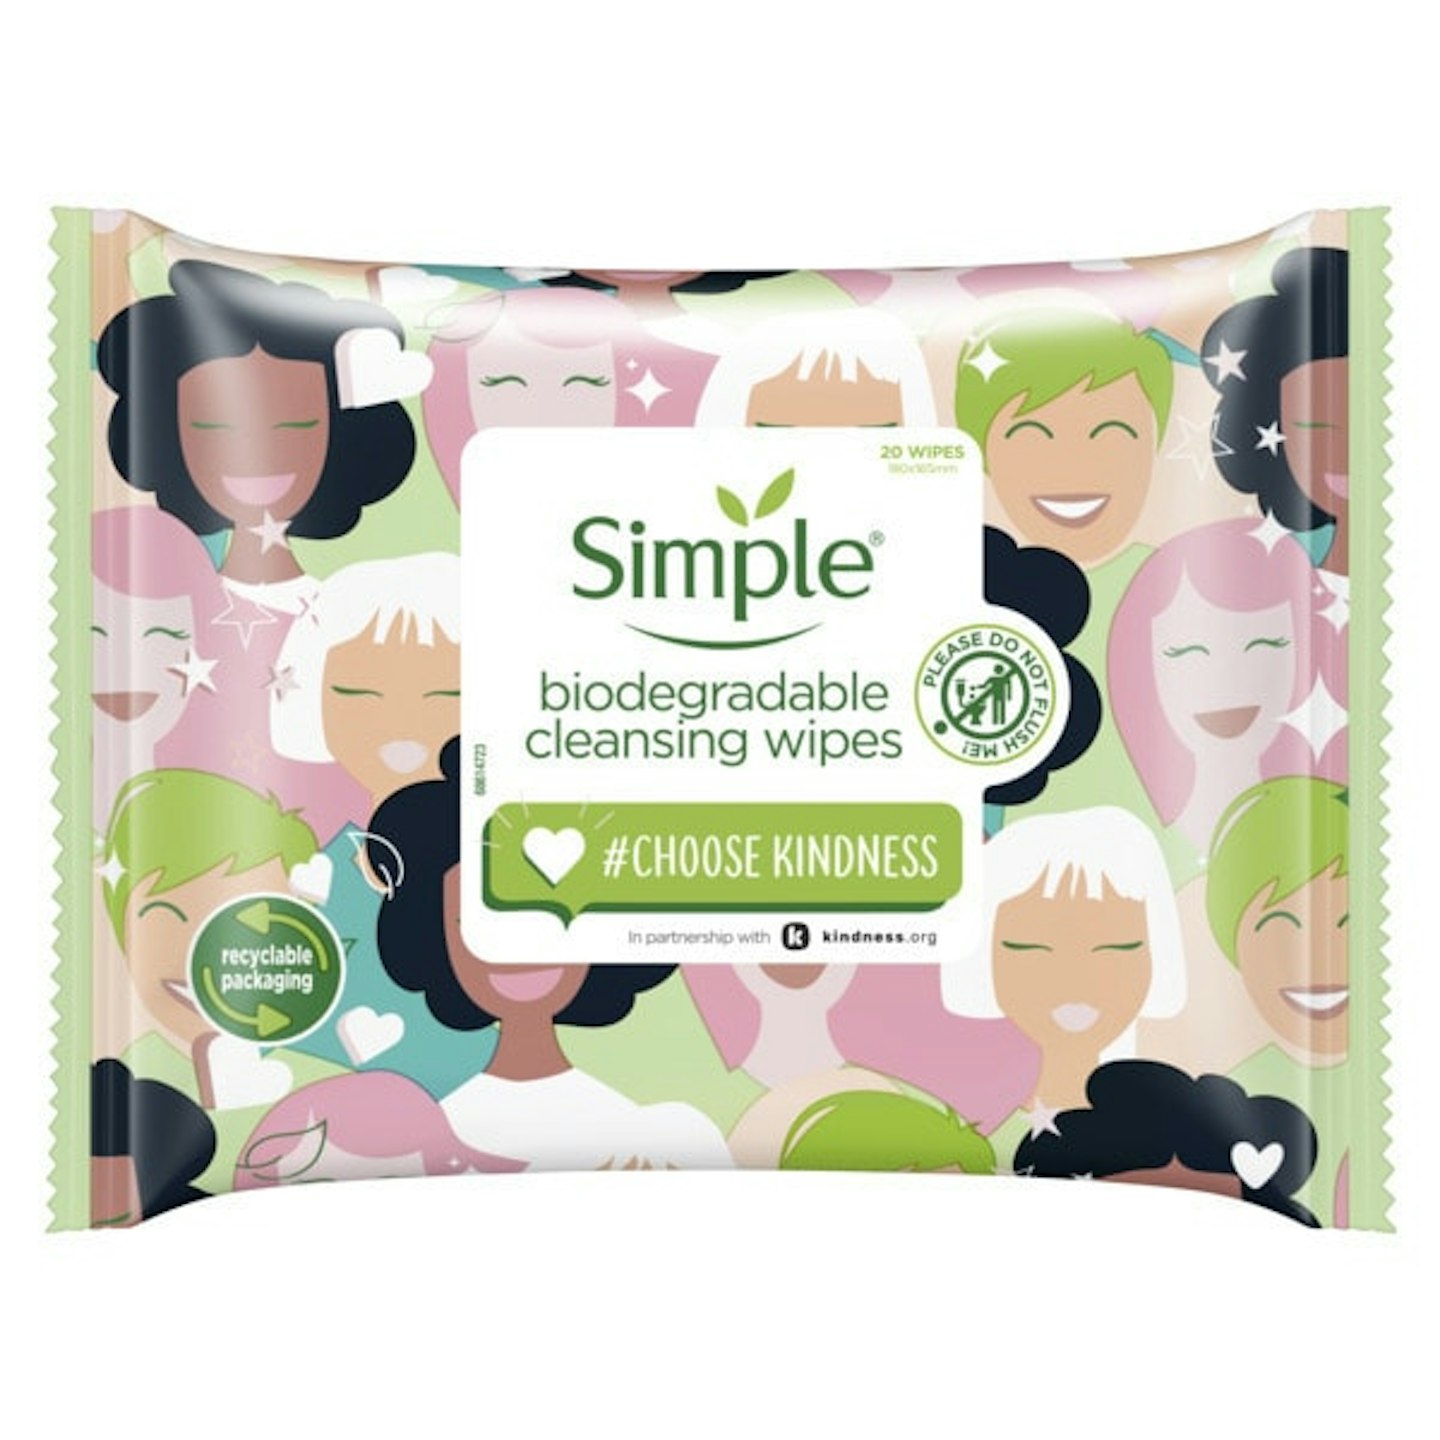 Simple x Kindness Biodegradable Cleansing Wipes